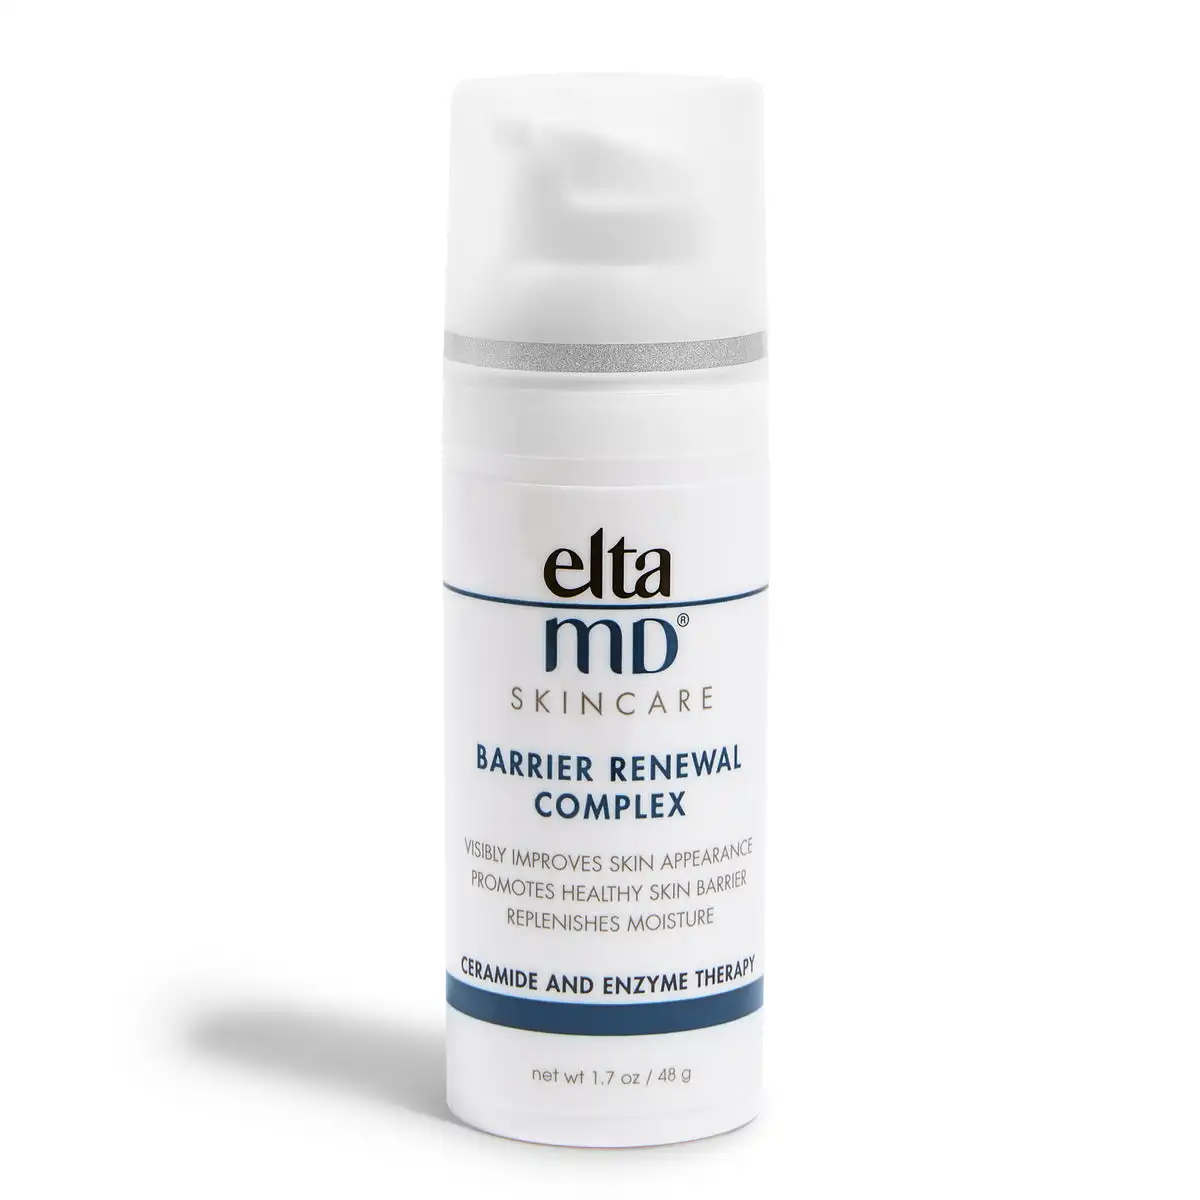 

EltaMD PM Therapy Facial Moisturizer AM For Moisturizes and smoothes skin Brightens and improves skin restores elasticity